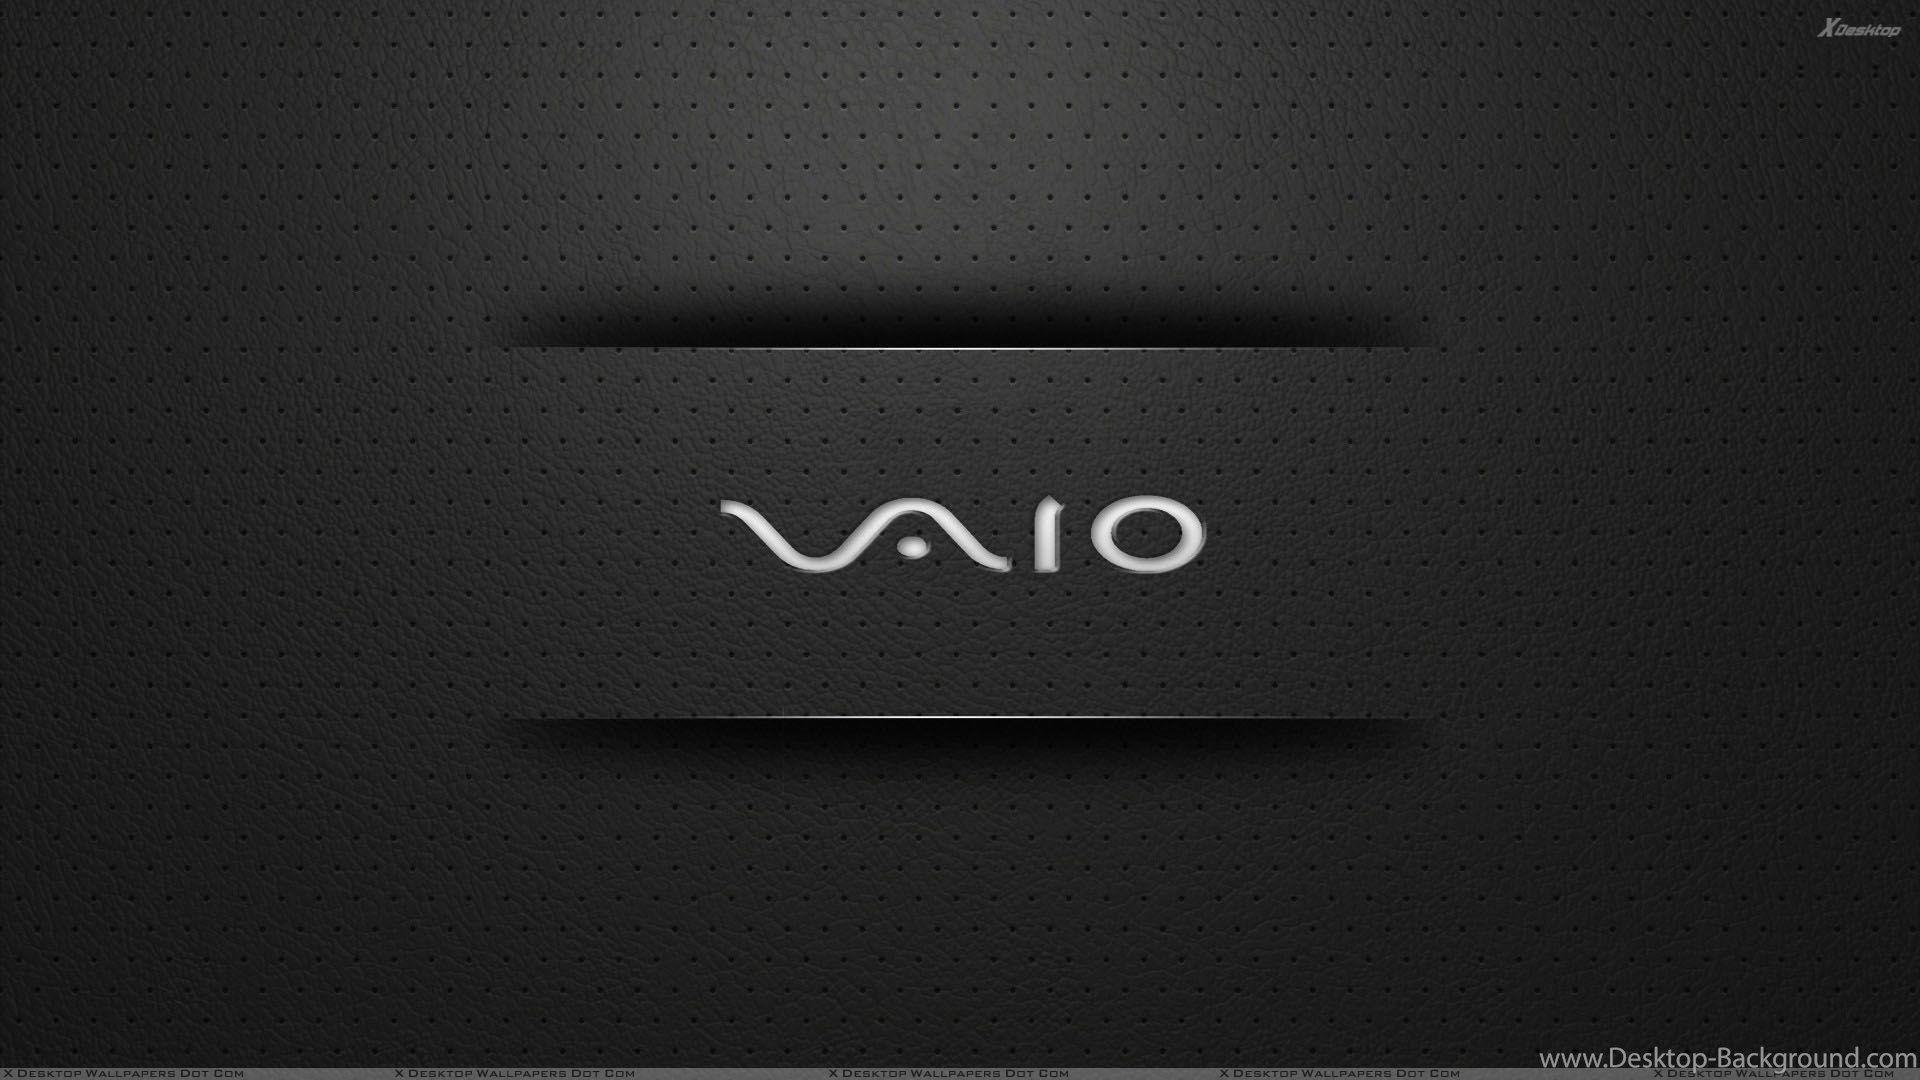 Vaio Logo - Sony Vaio LoGo On Black Dotted Backgrounds Wallpapers Desktop Background